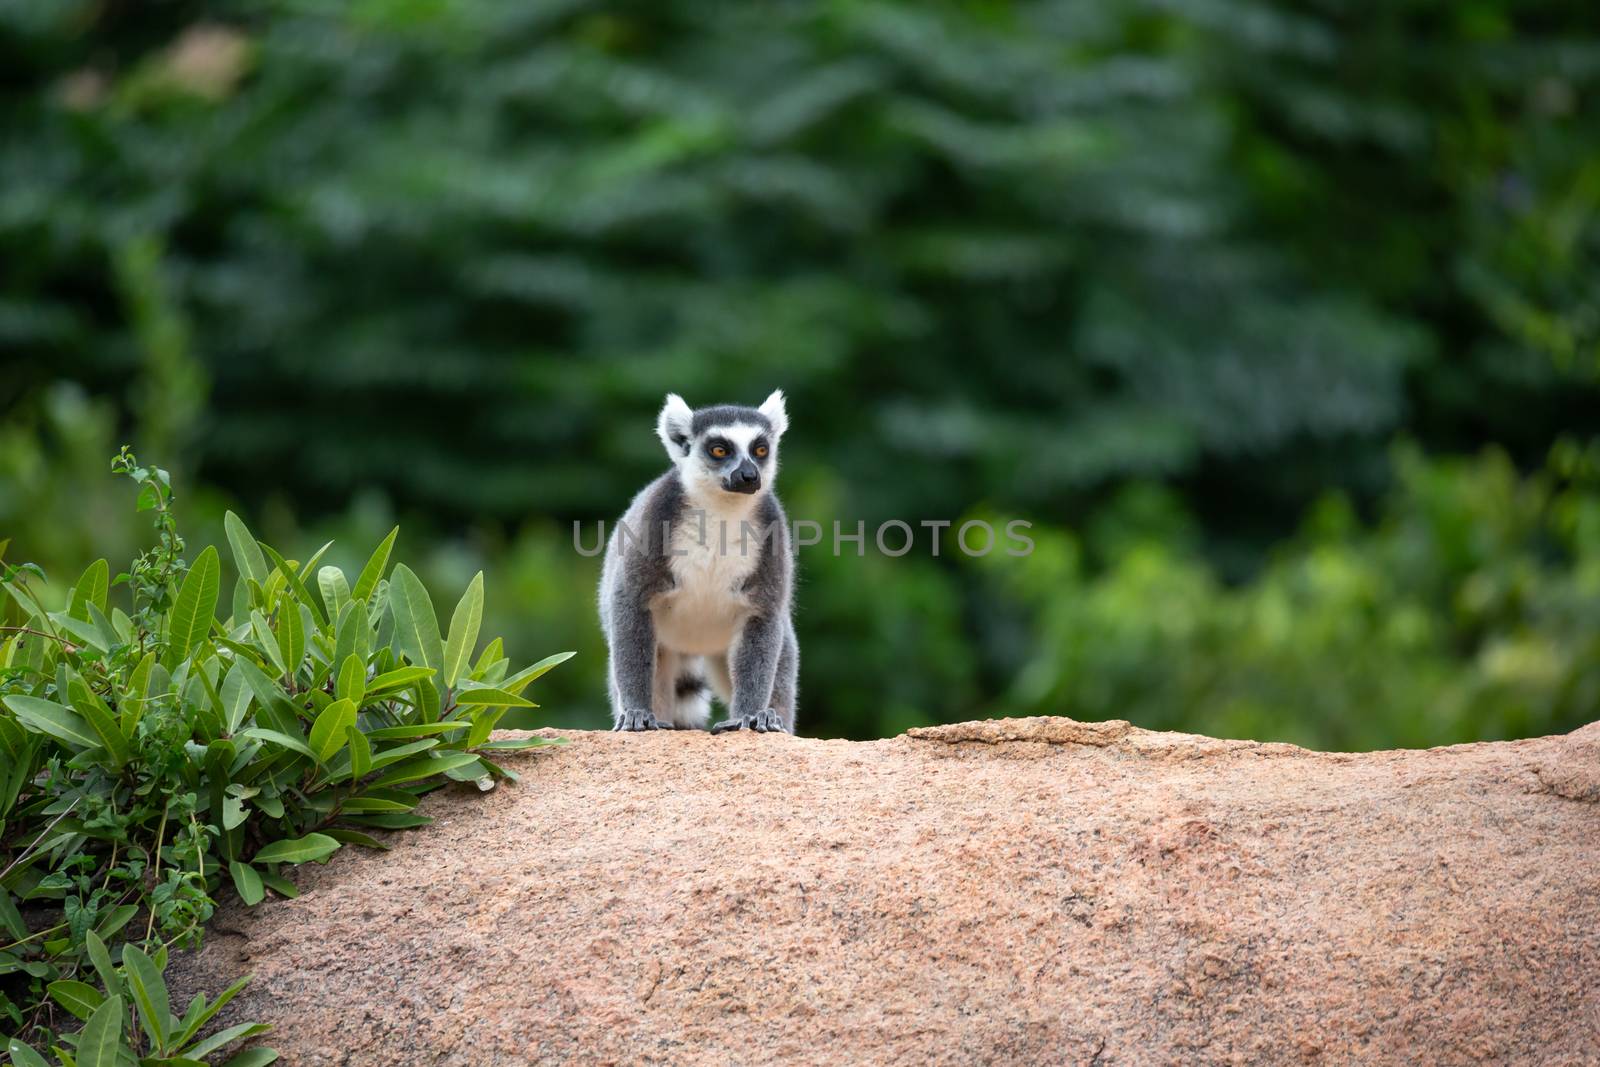 A ring-tailed lemur on a large stone rock by 25ehaag6